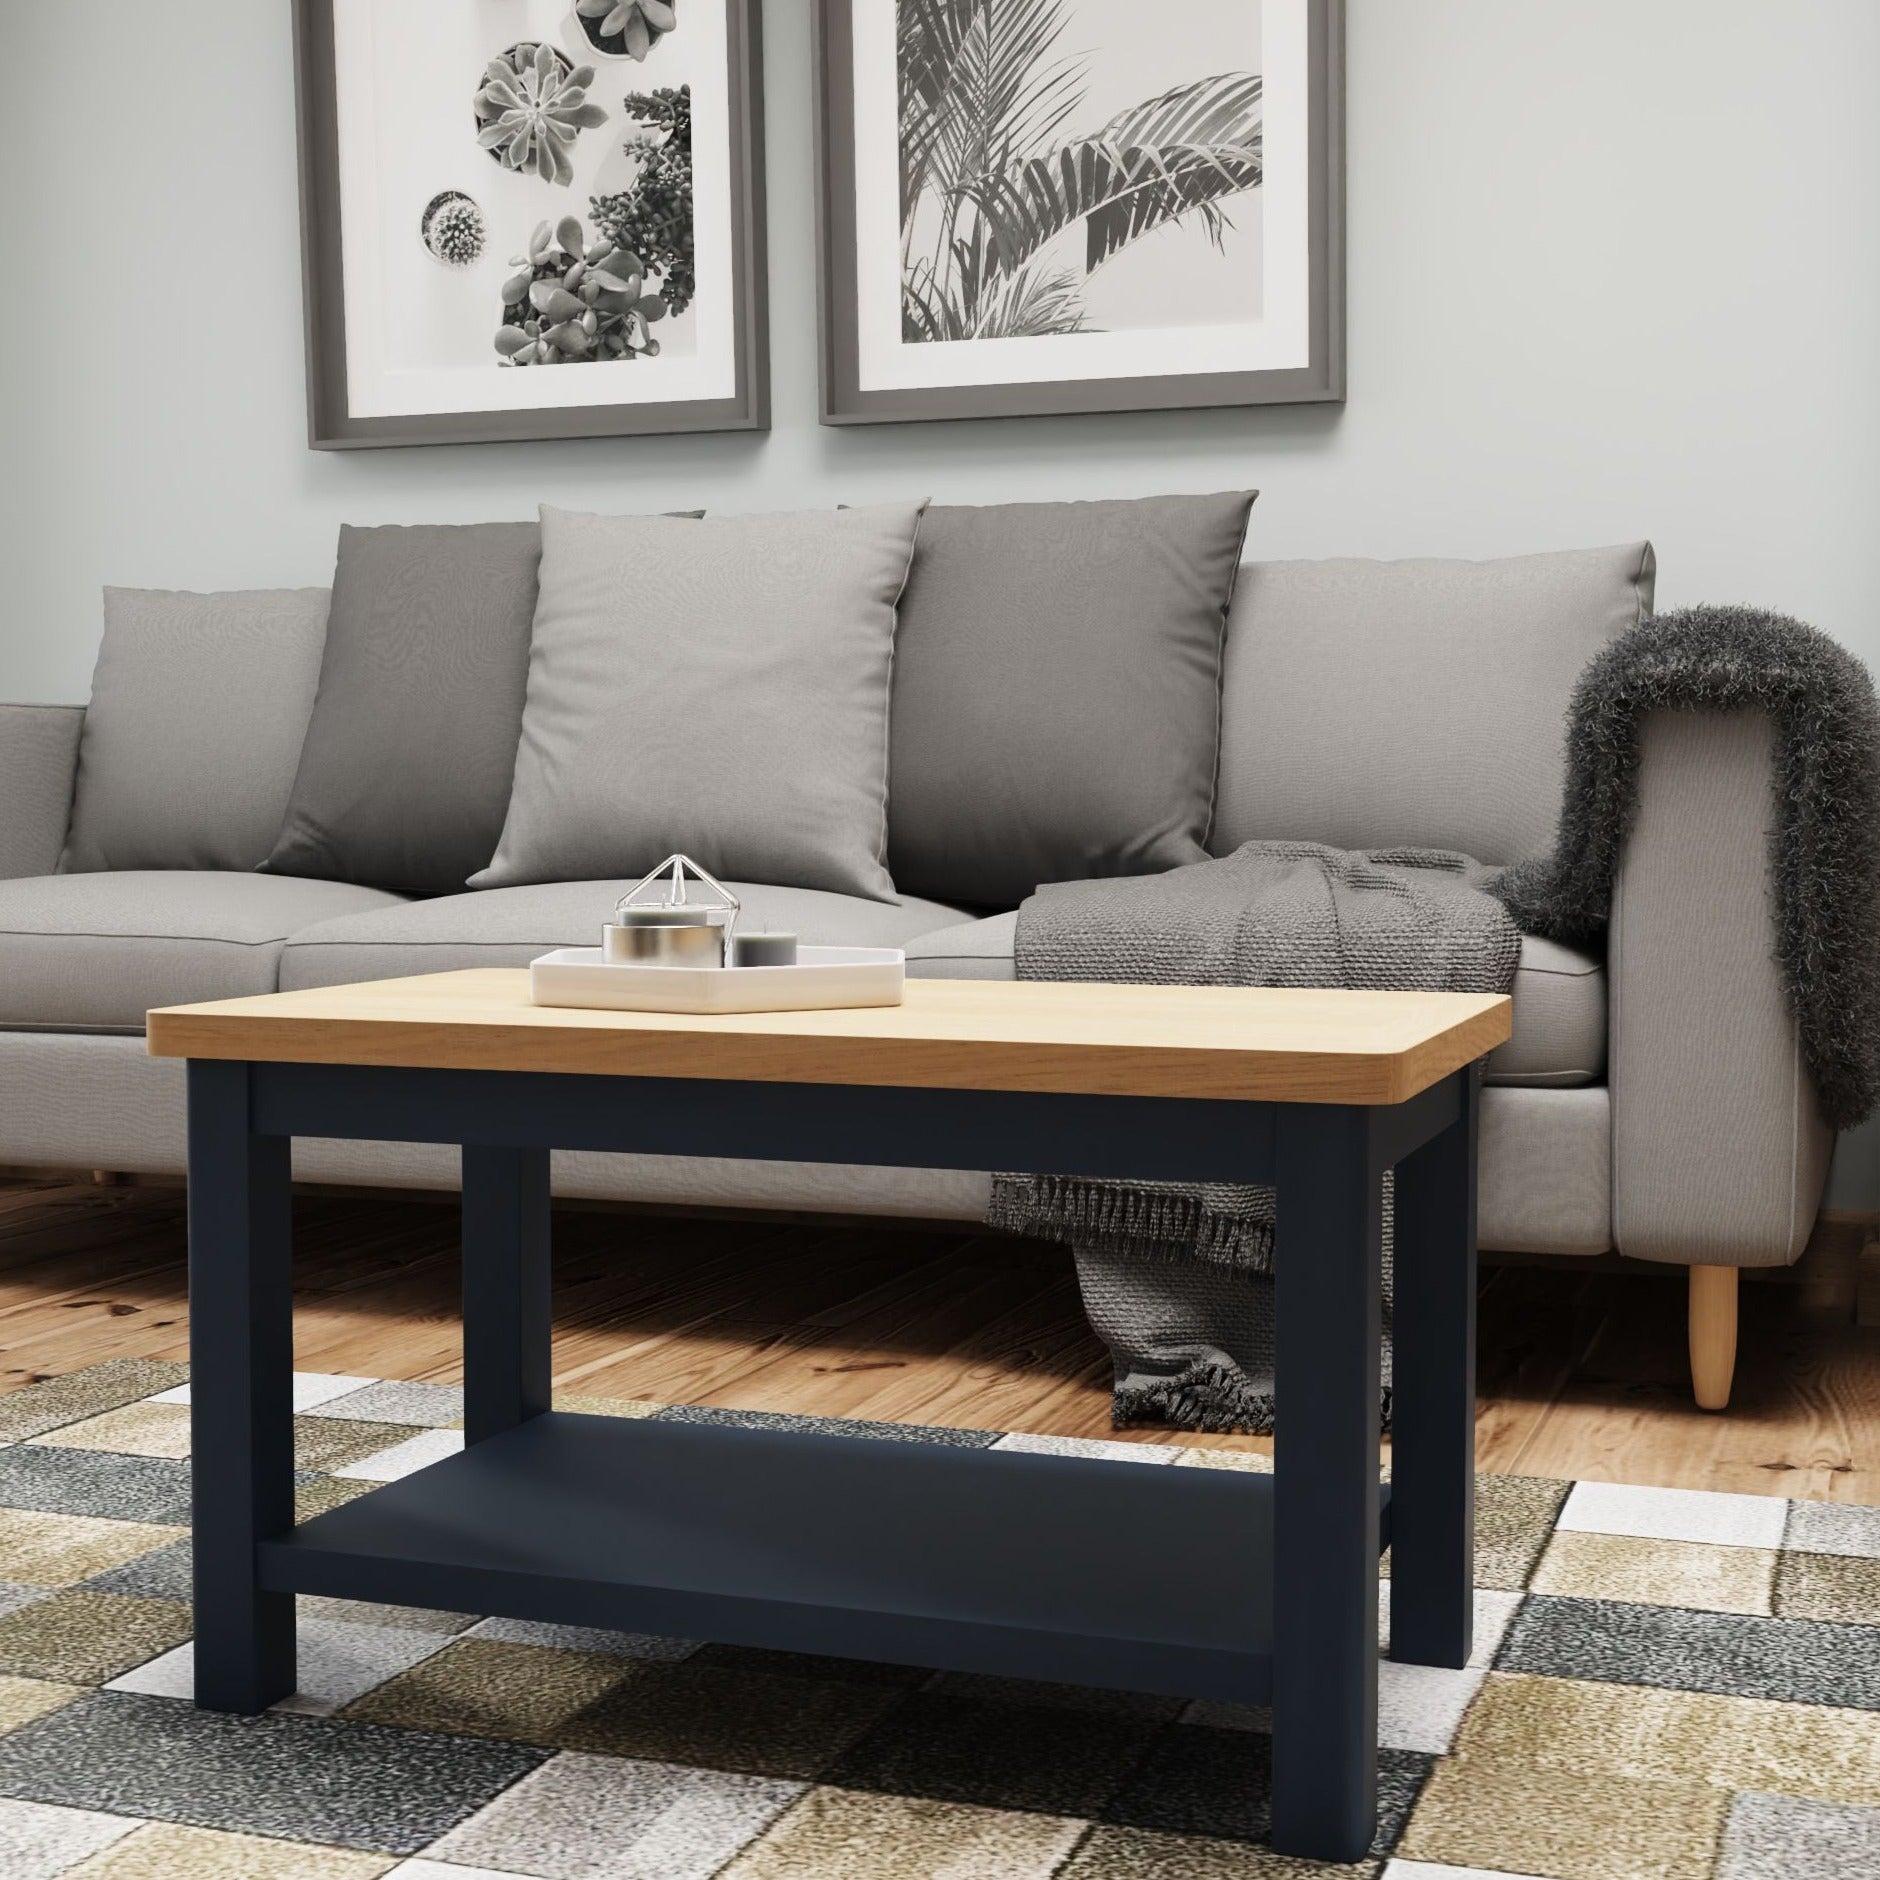 Bluebell Wood Small Coffee Table - Duck Barn Interiors